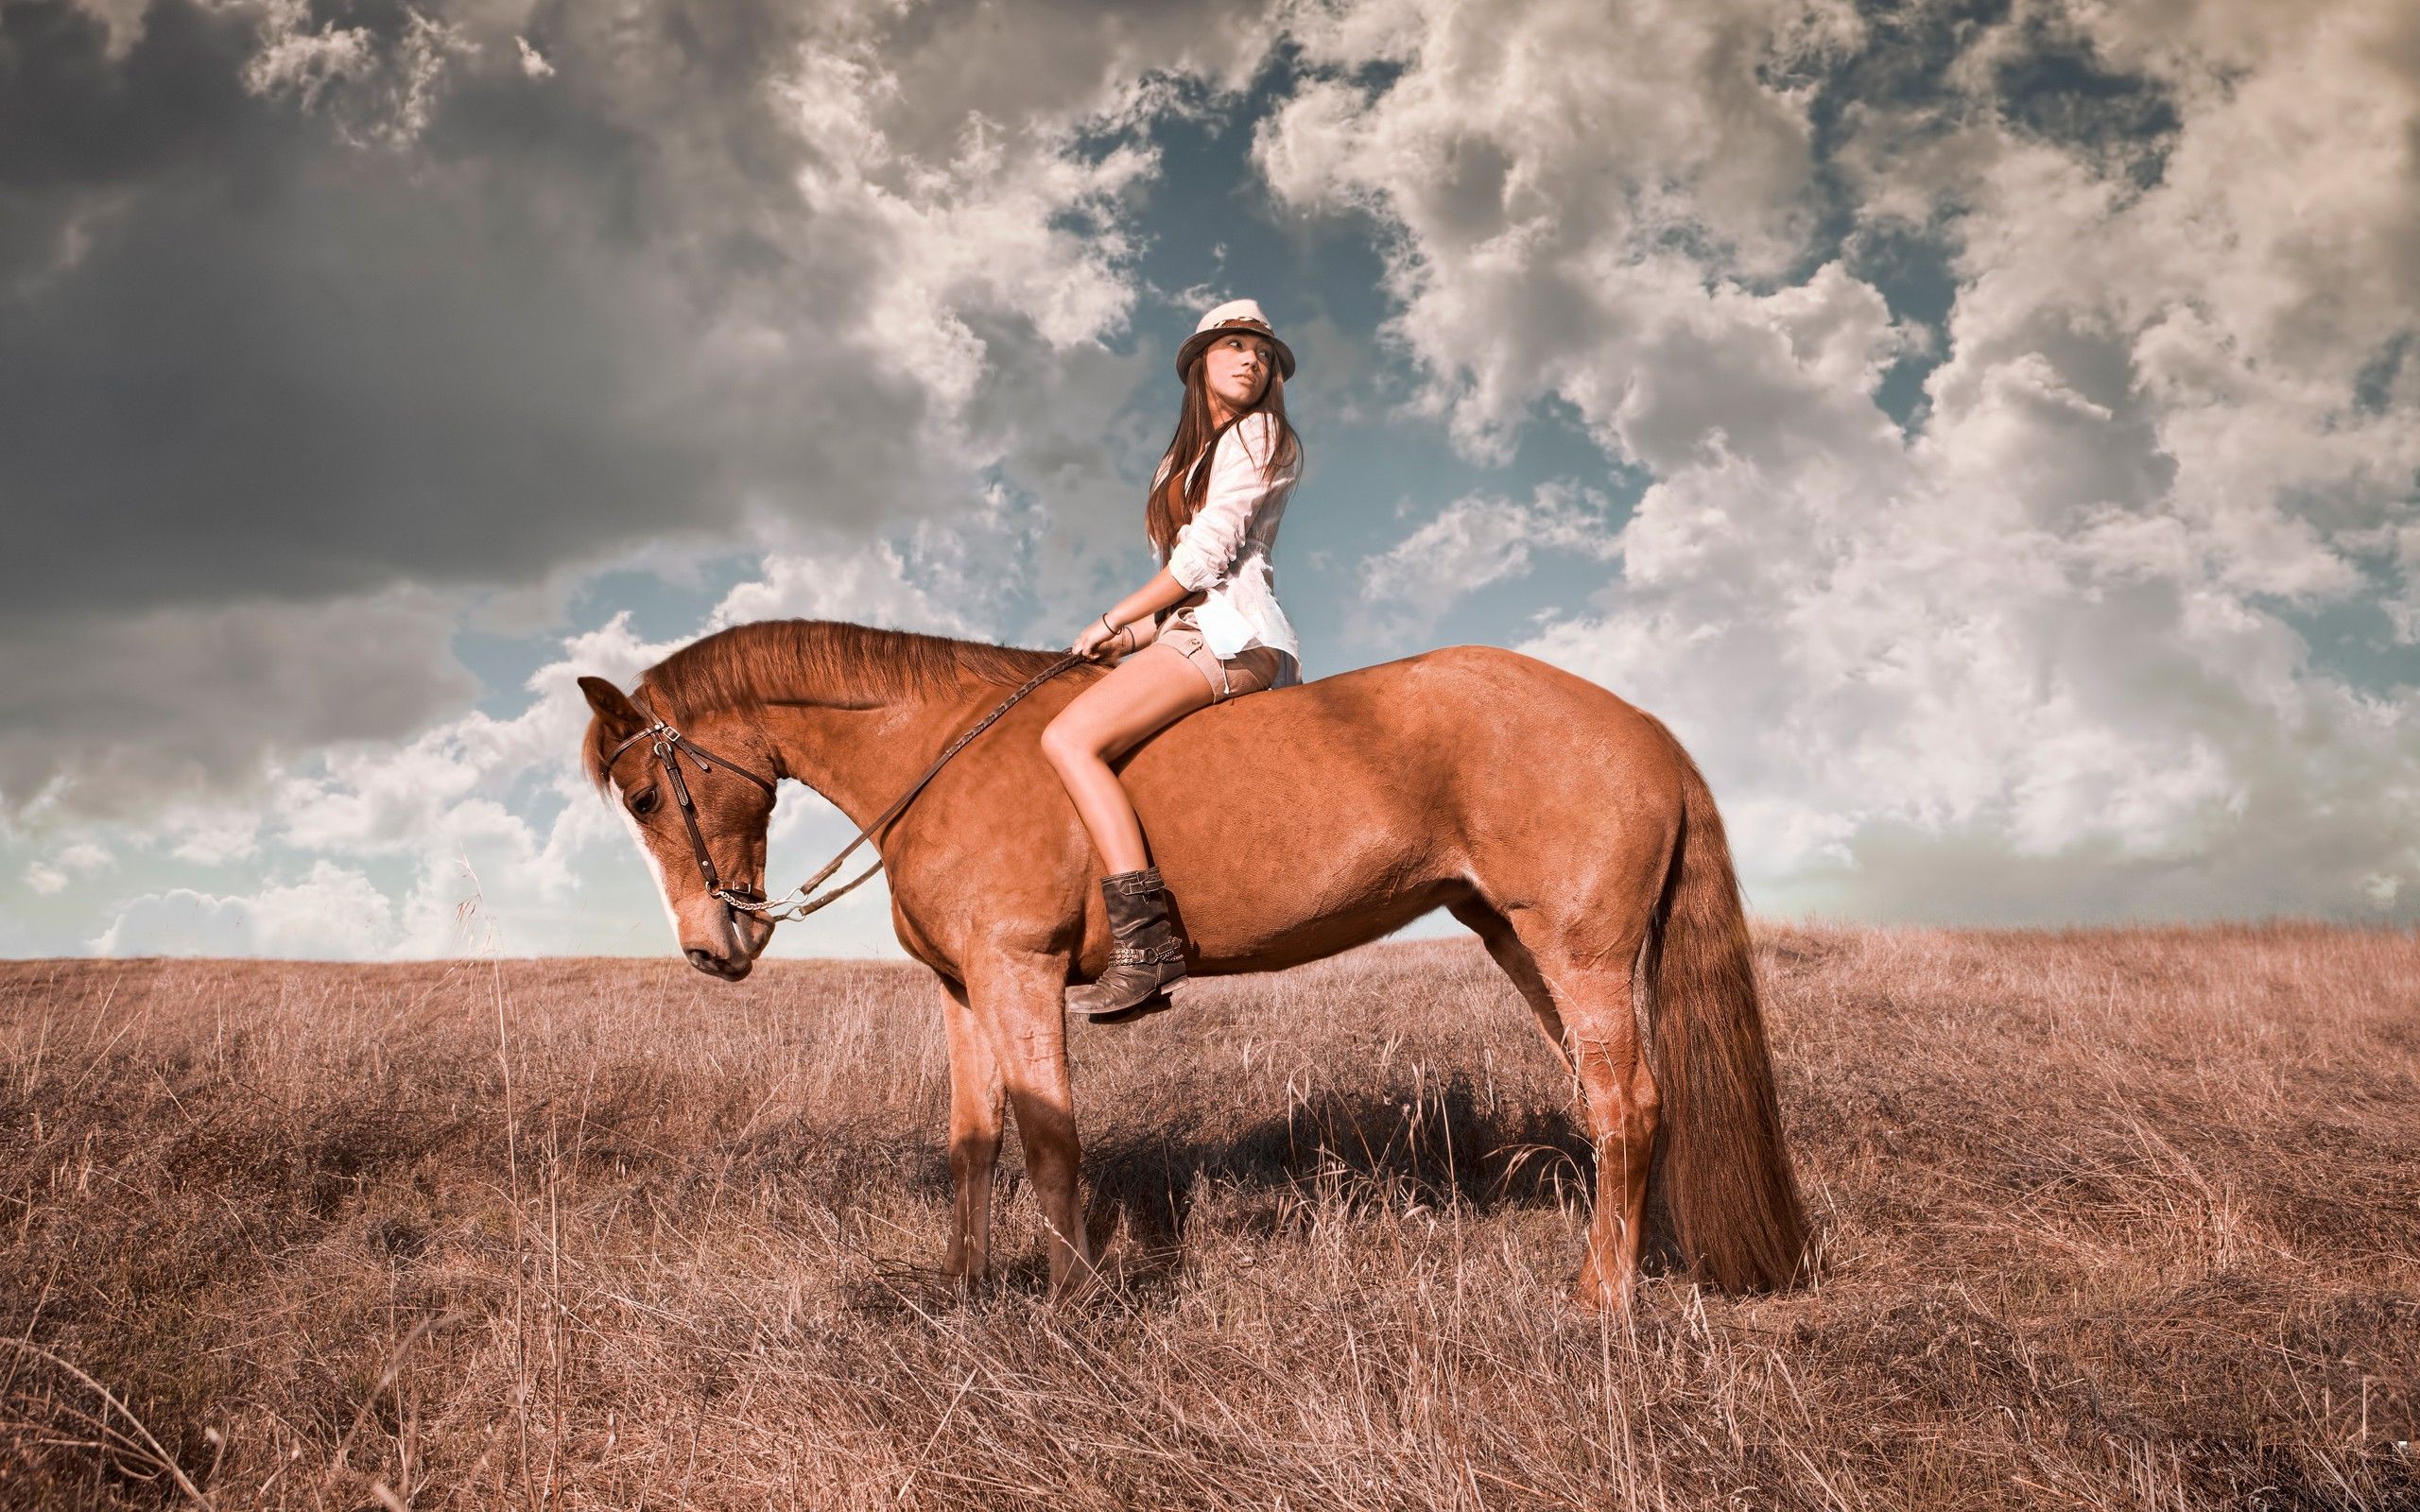 Girl in hat riding a horse wallpaper and image, picture, photo